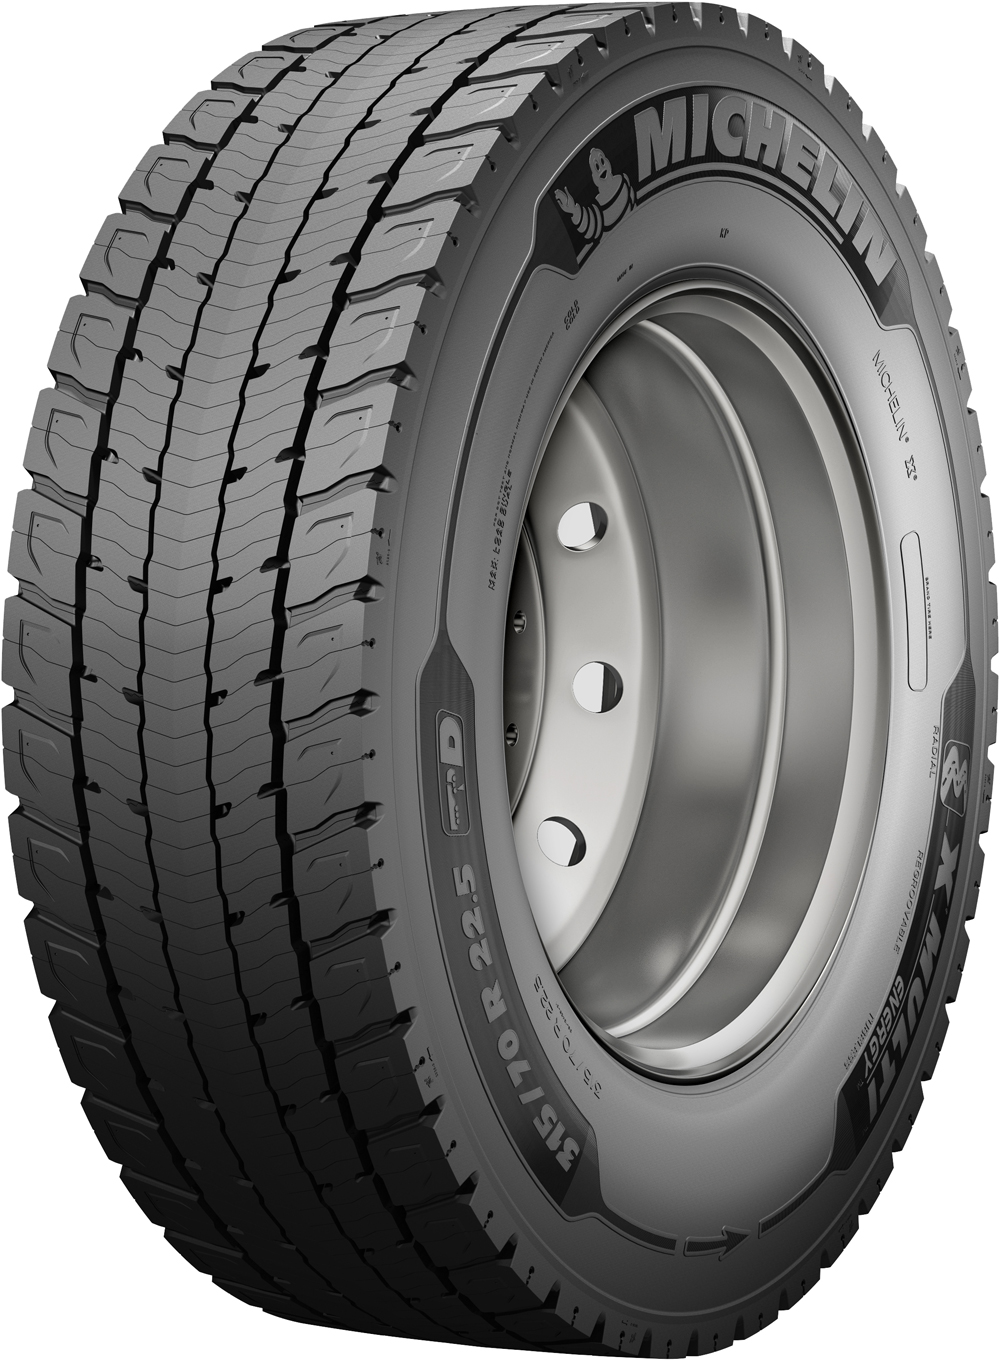 product_type-heavy_tires MICHELIN X MULTI ENERGY D DEMO 315/70 R22.5 154L